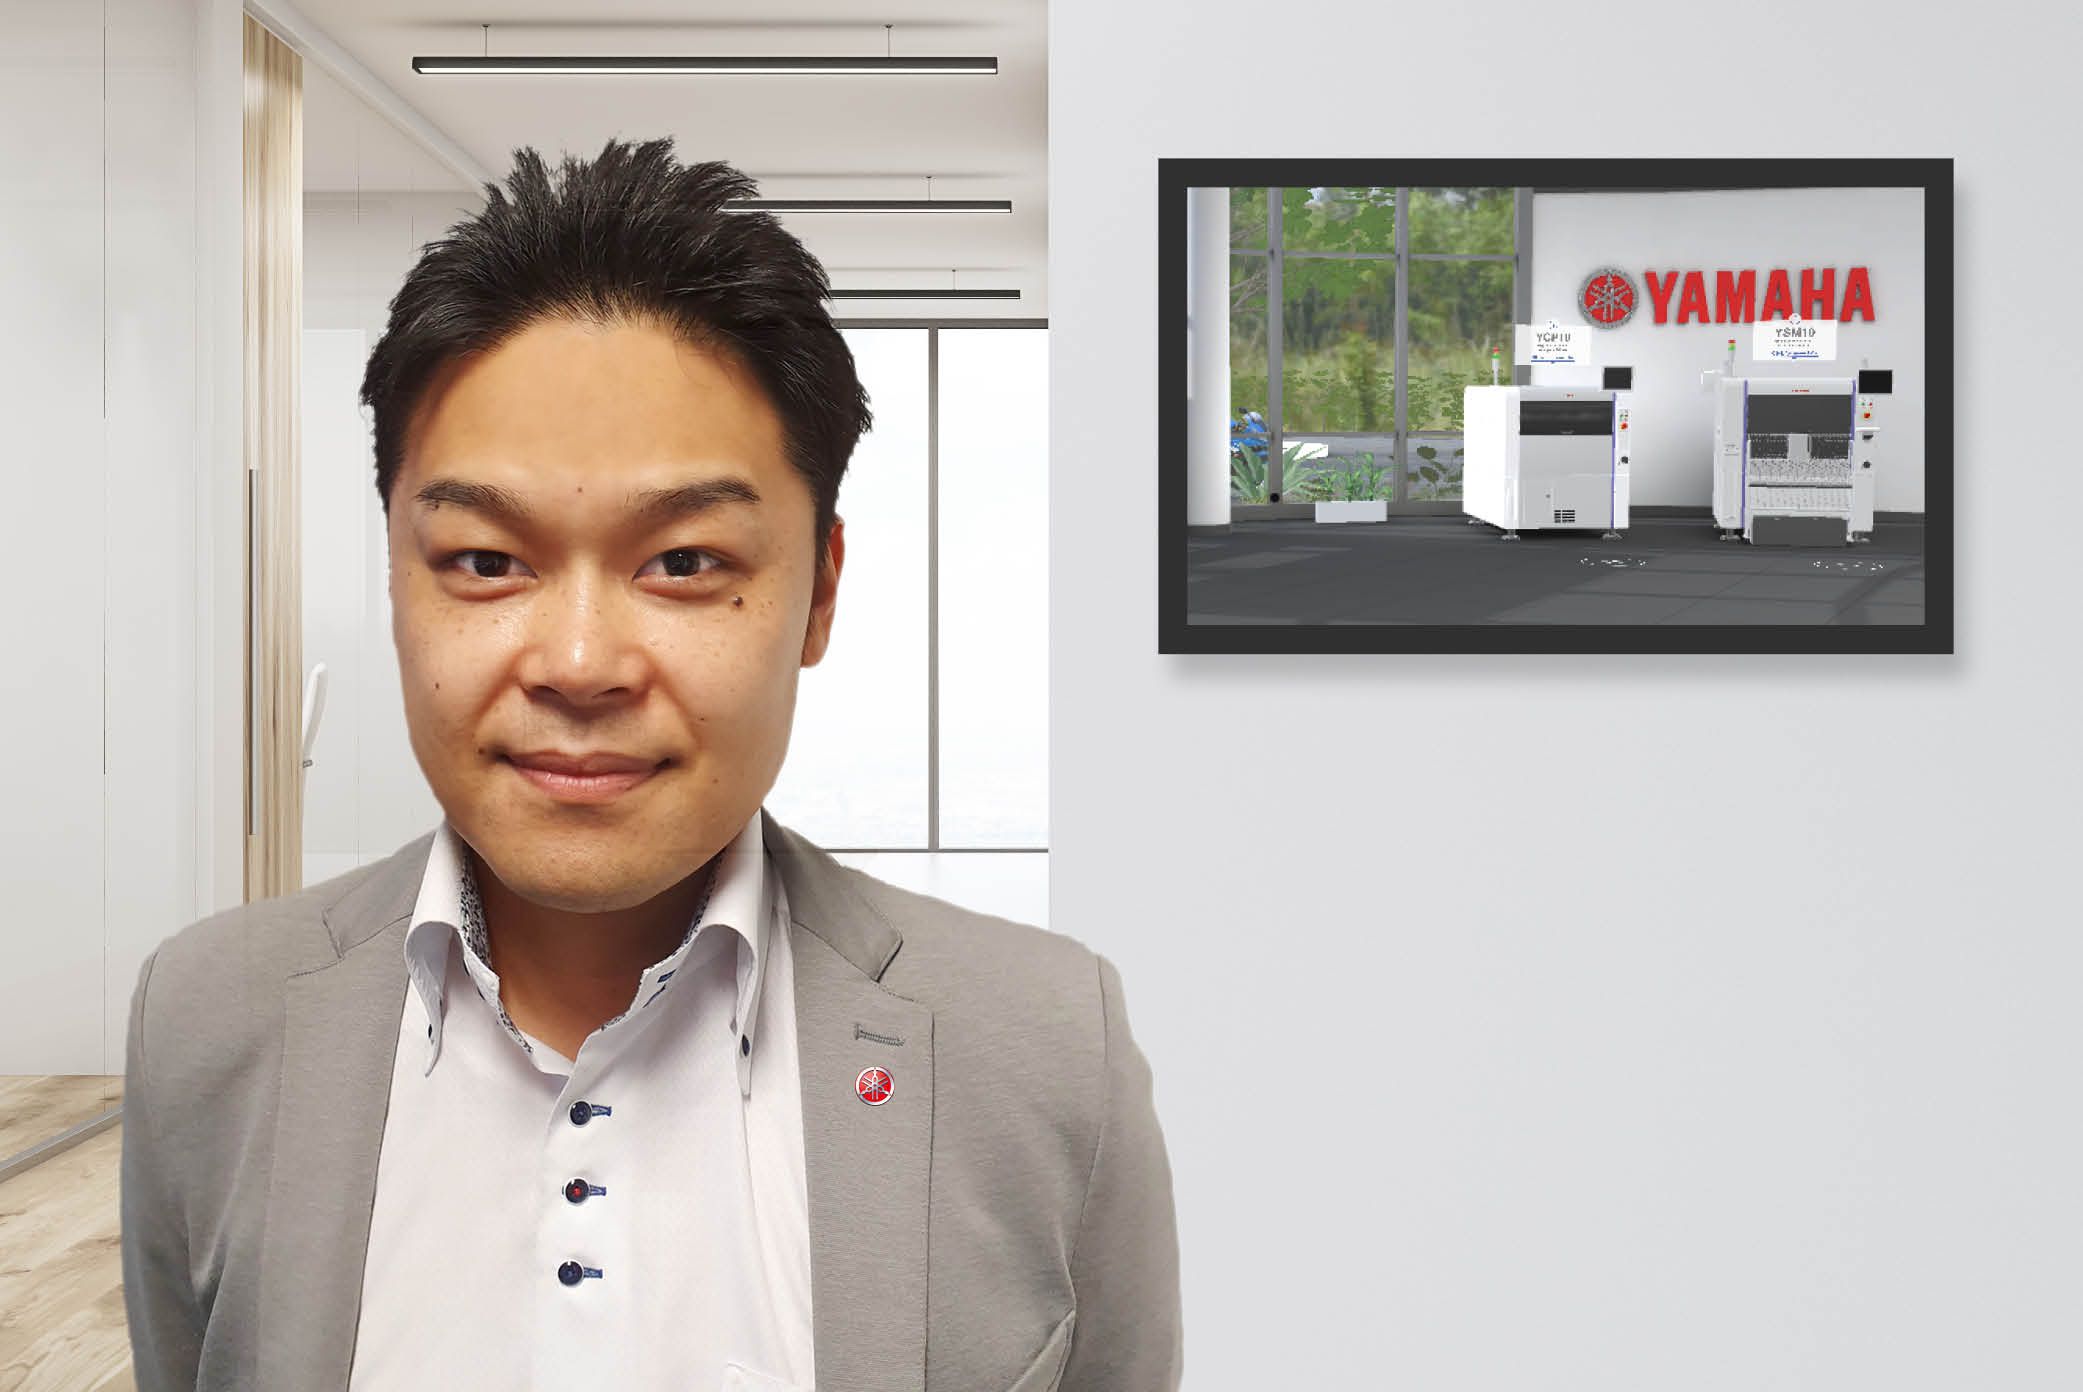 Daisuke Yoshihara, General Manager at Yamaha Motor Europe share his thoughts about Productronica 2021